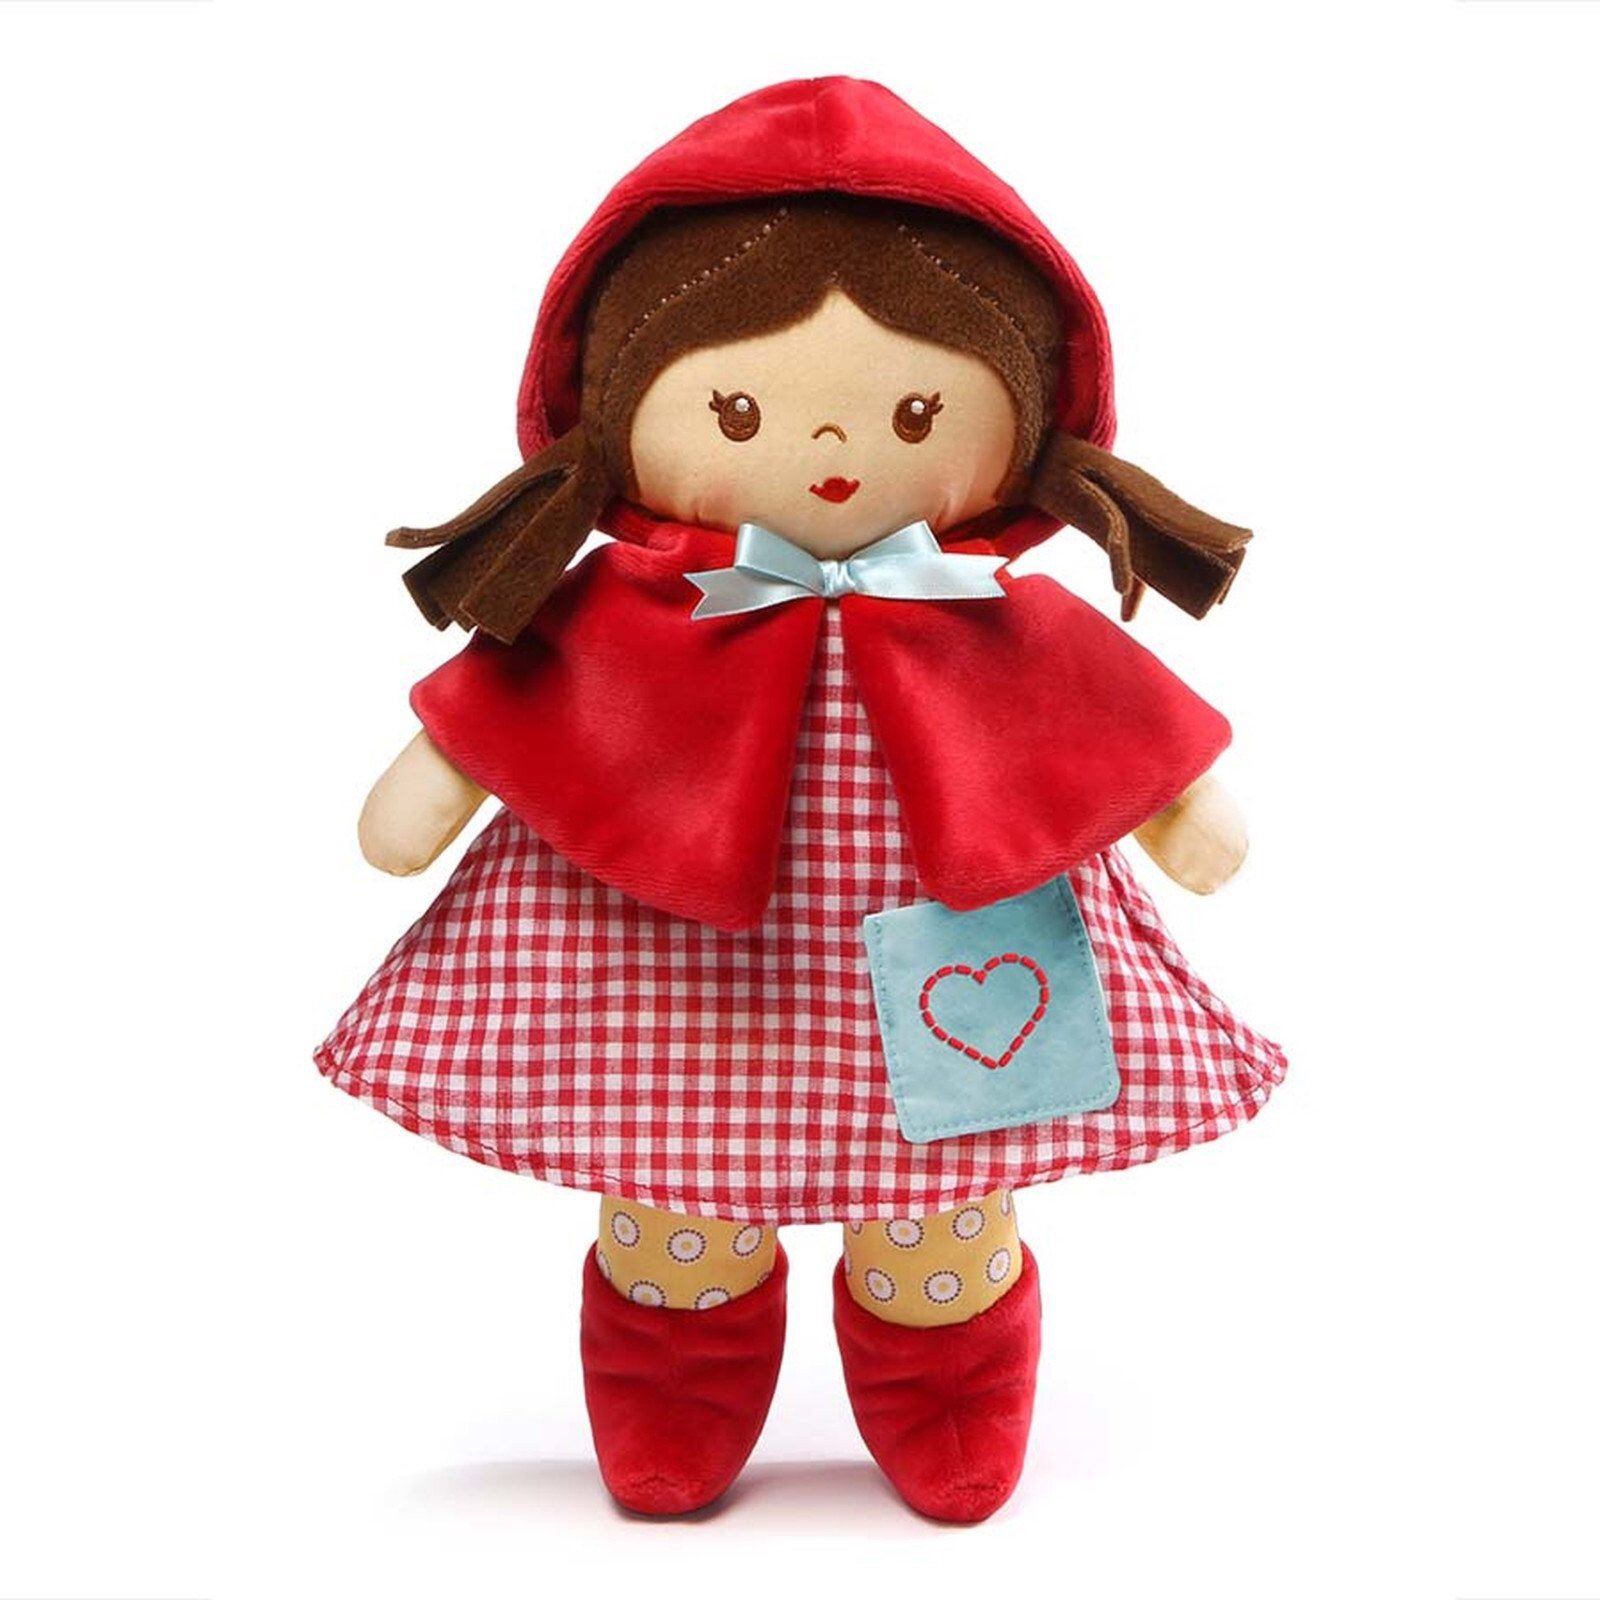 Red doll